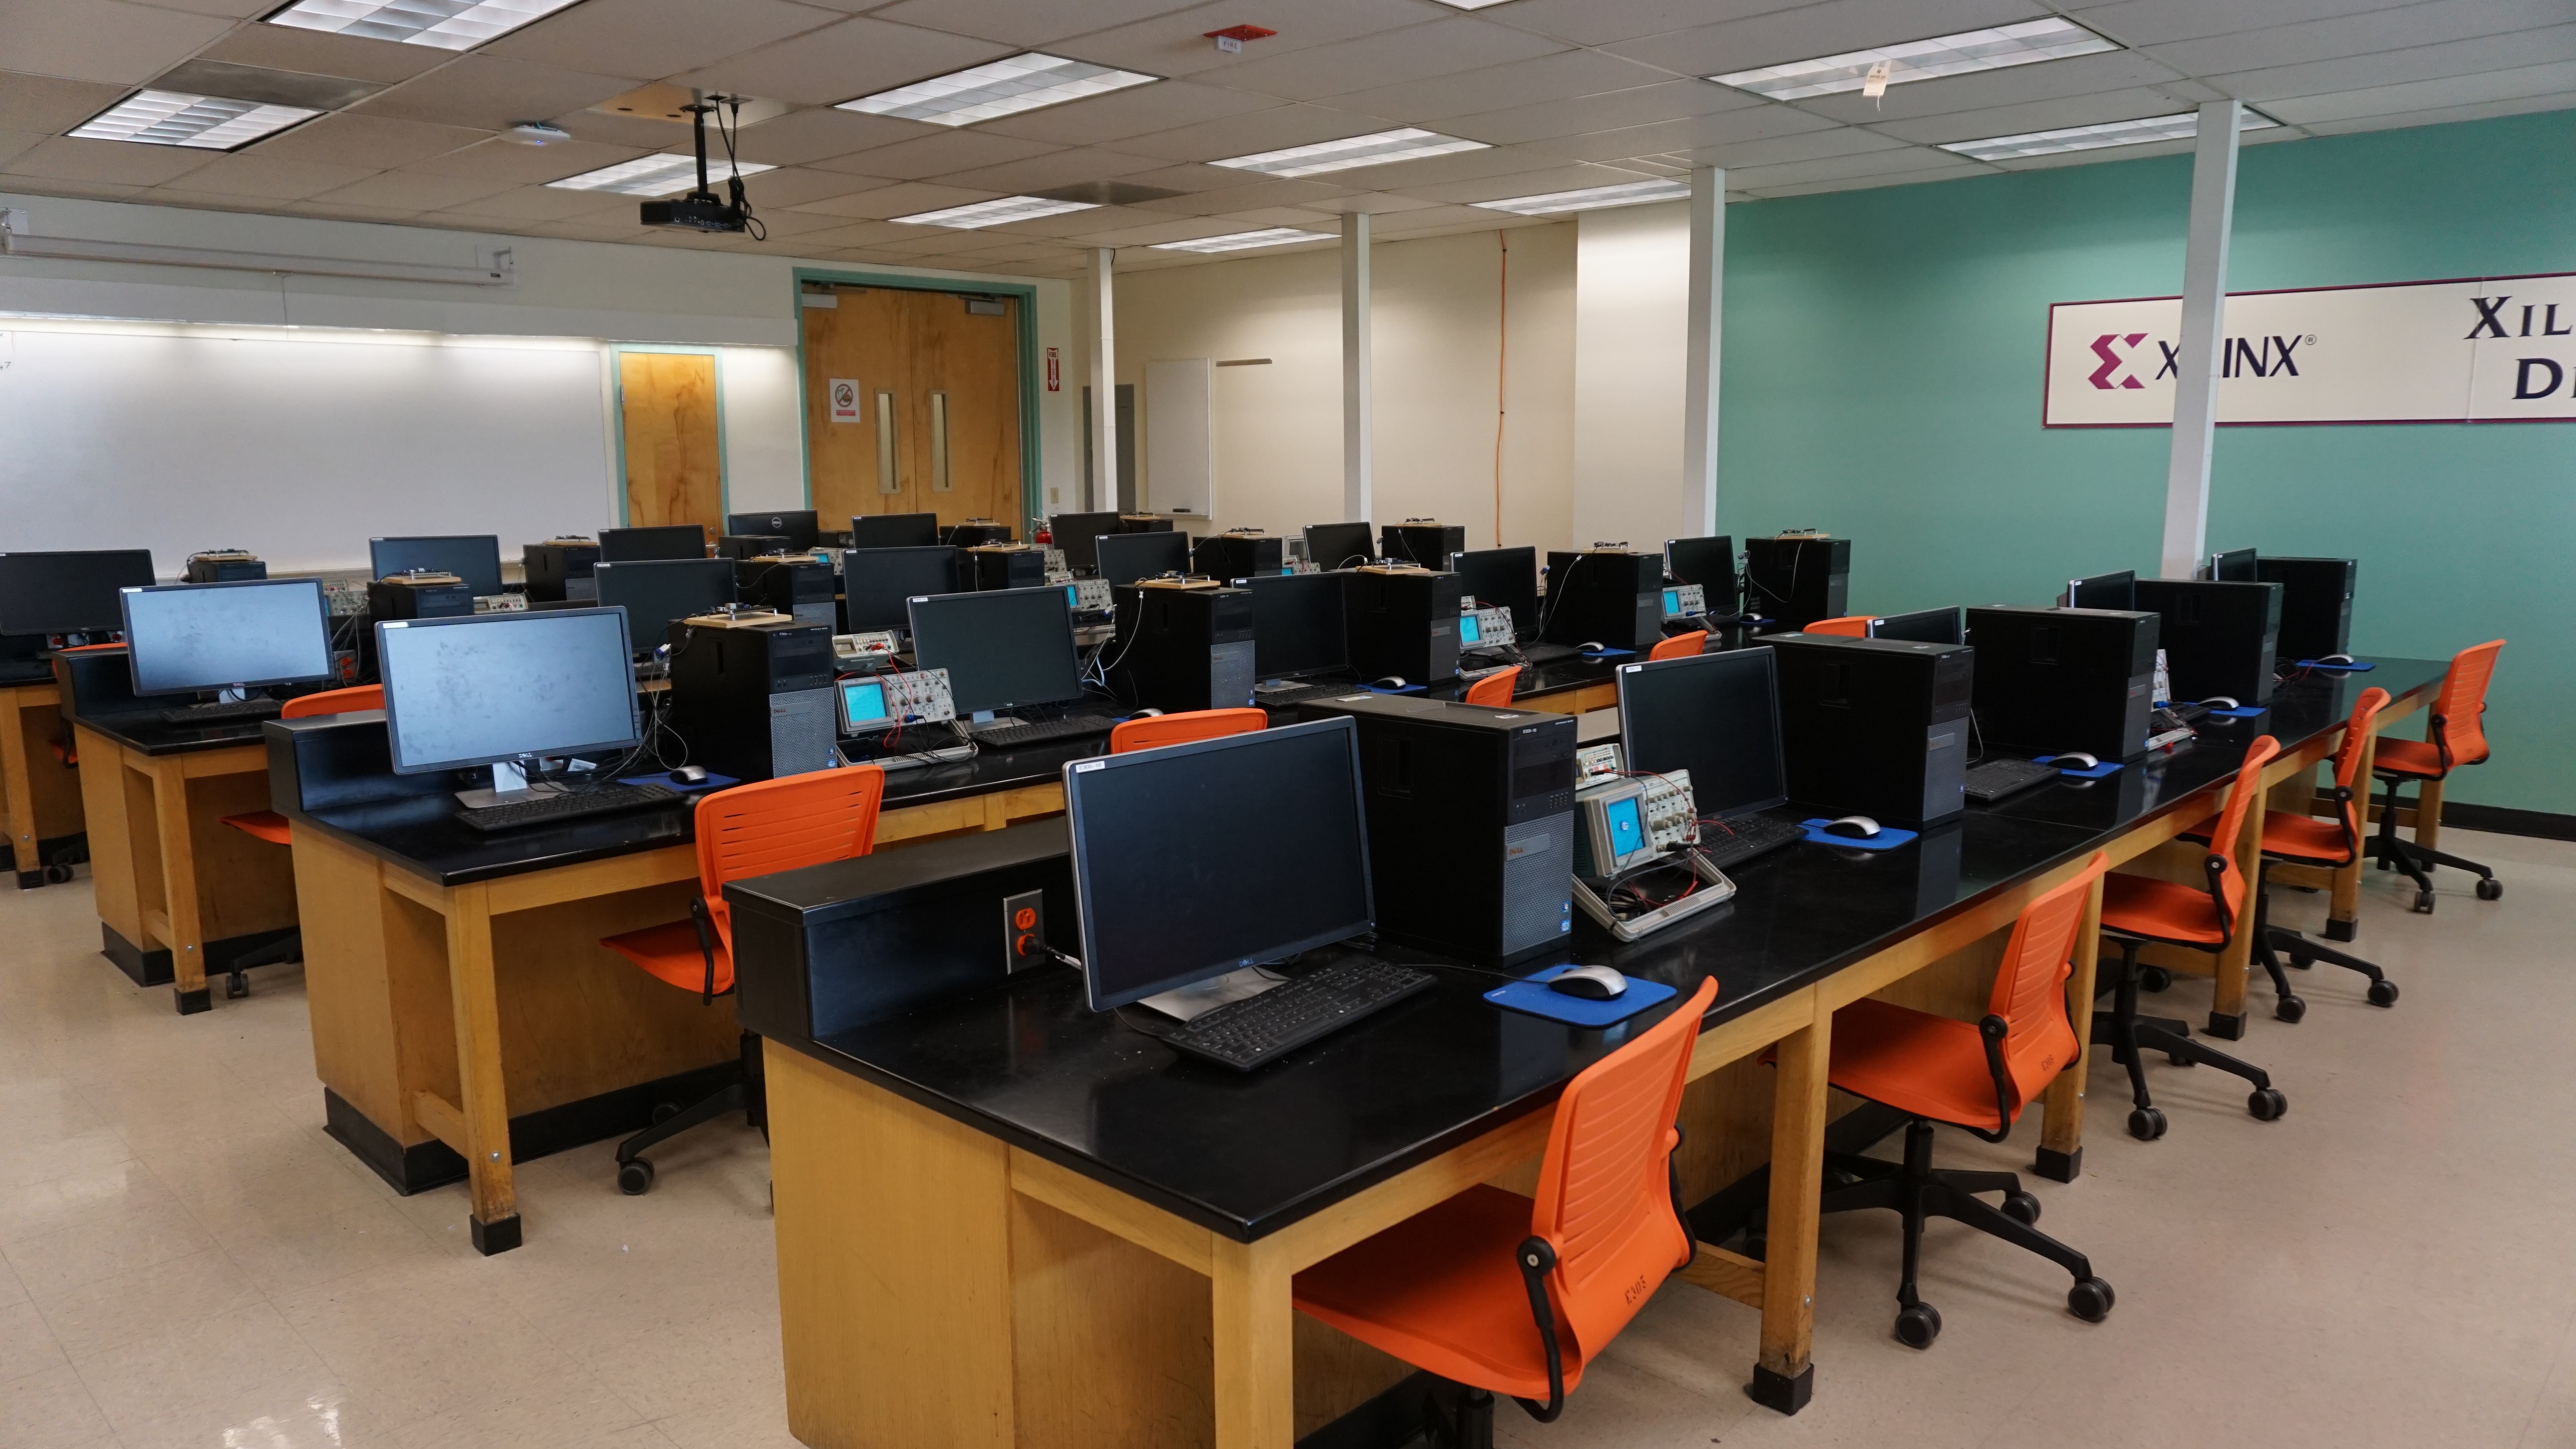 A classroom with computers, orange chairs, and a bright teal wall with the Xilinx logo.